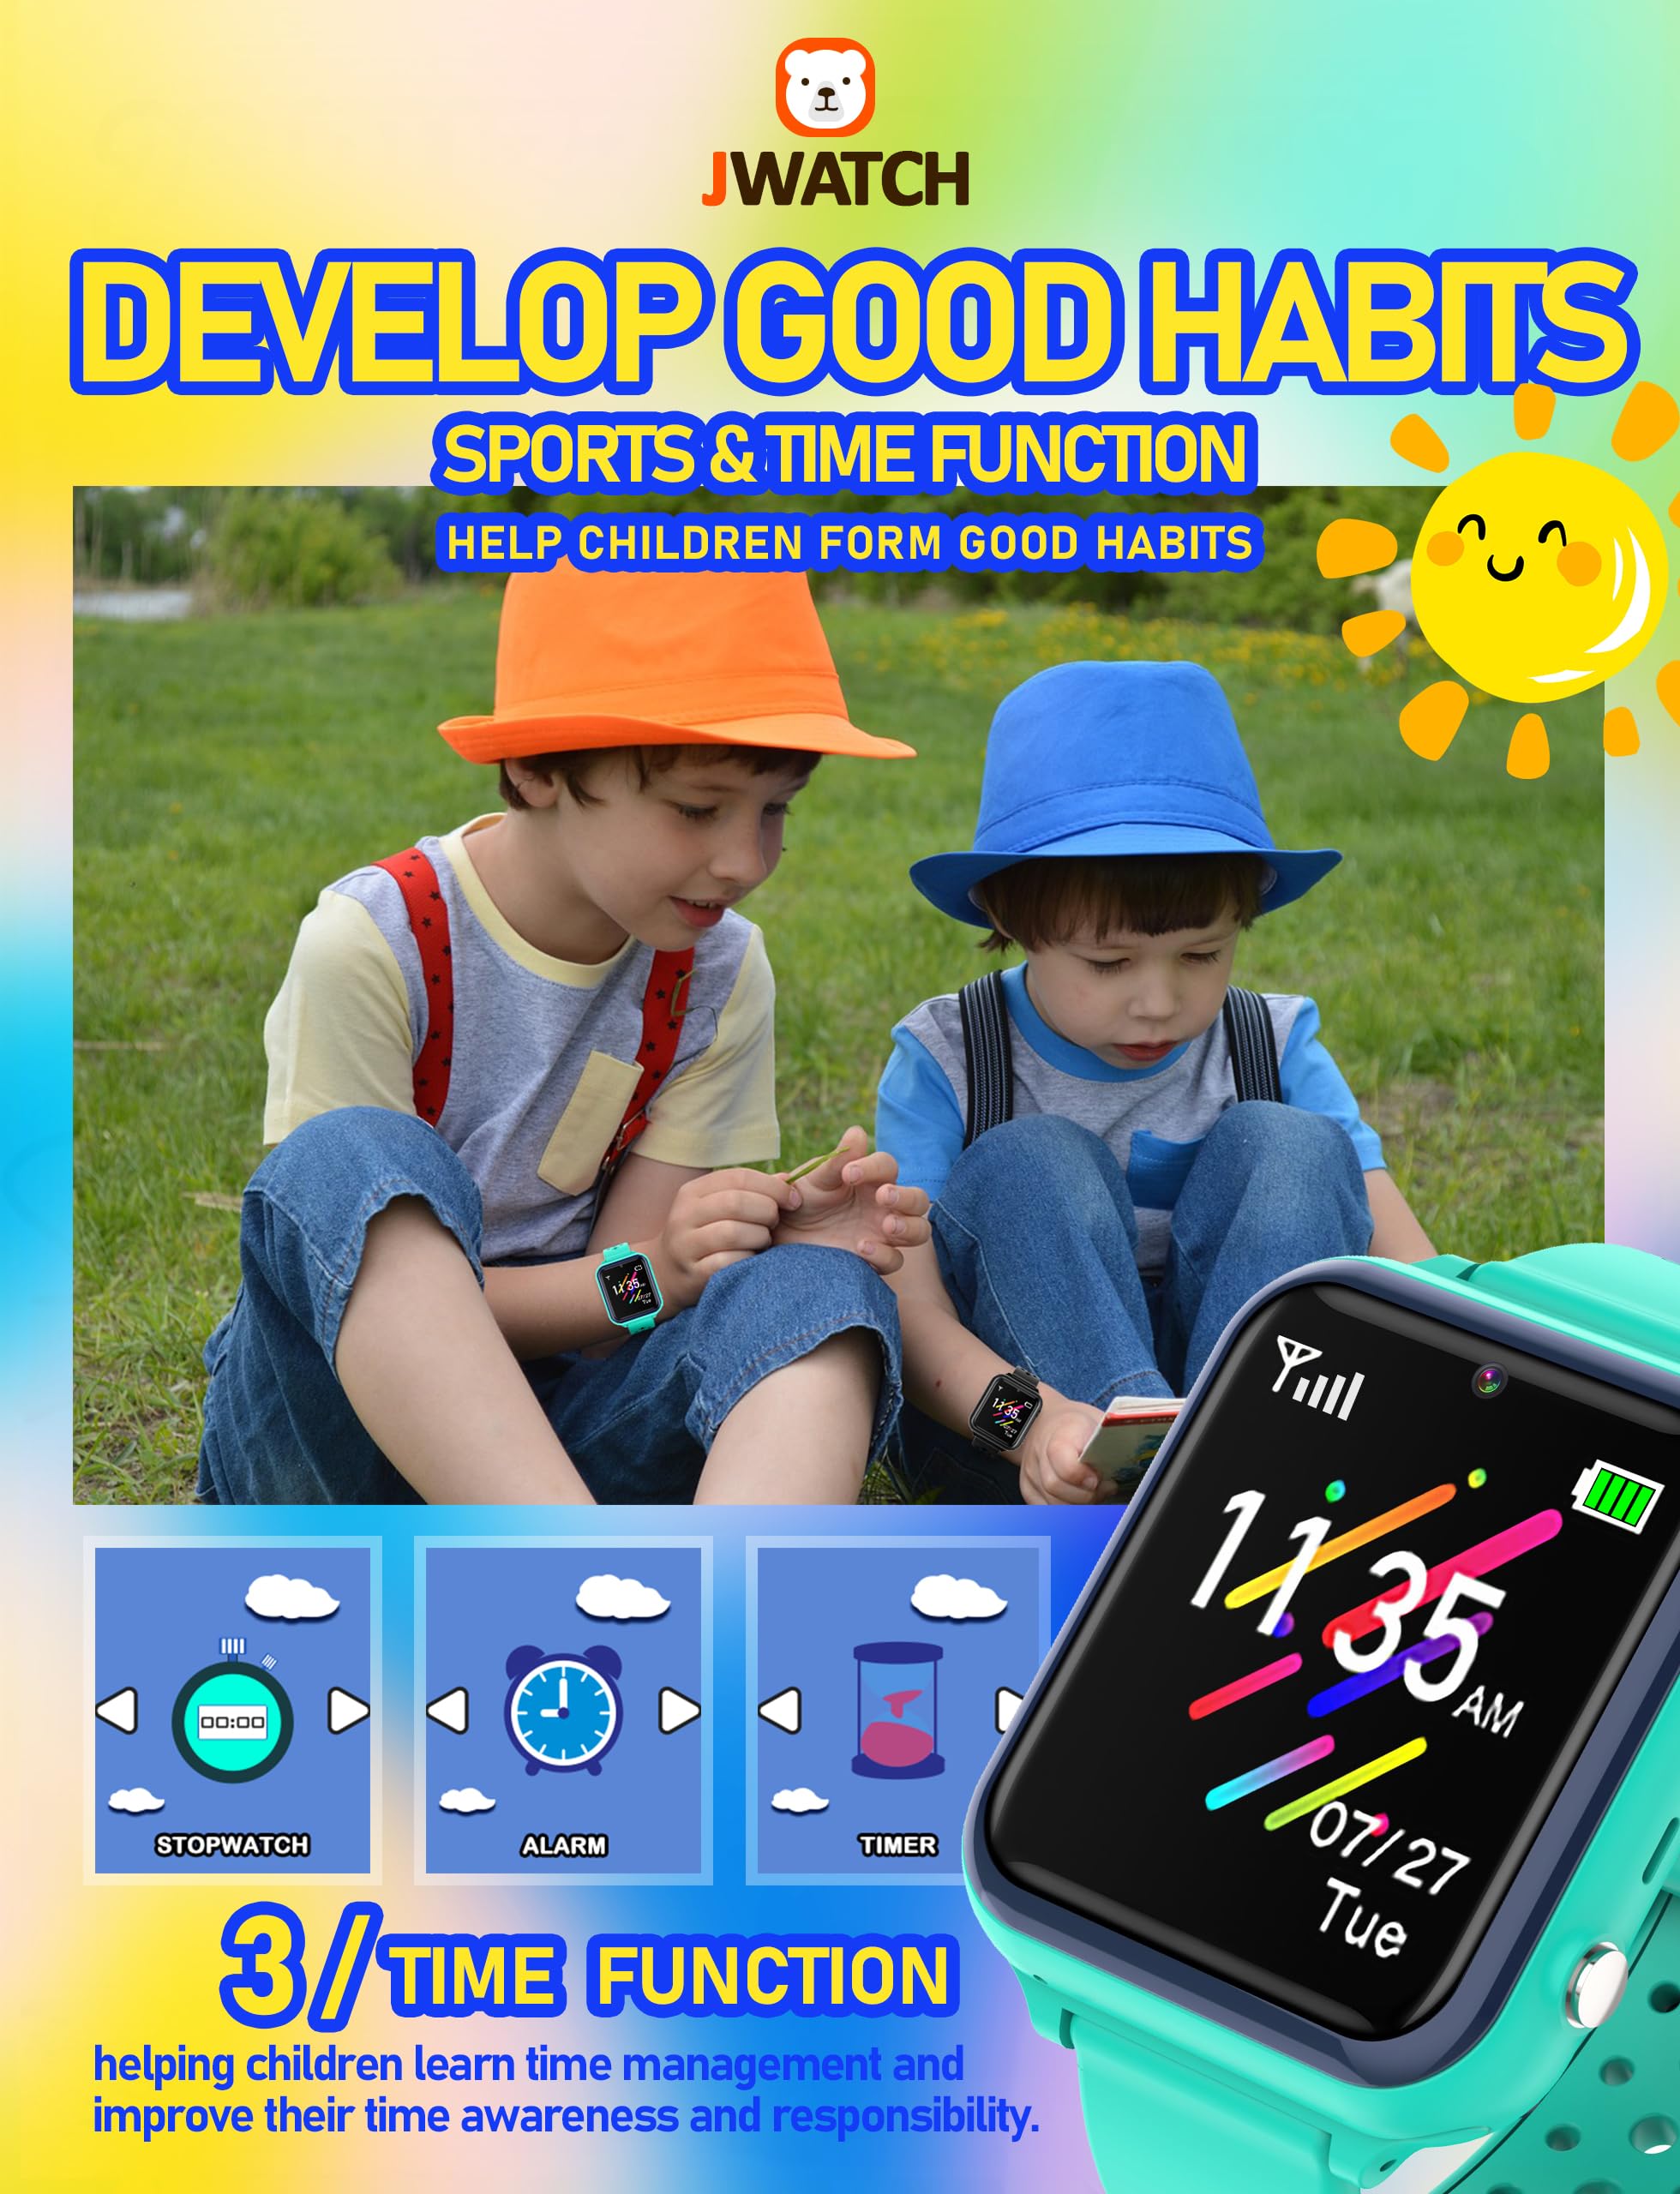 Jwatch Kids Smart Watch Phone Sos with 10 Stories 16 Puzzle Games Stopwatch Alarm Clock Kids Watches Toys for 6 7 8 9 10 11 12 Boys Girls Gift for Birthday Christmas （Green）…